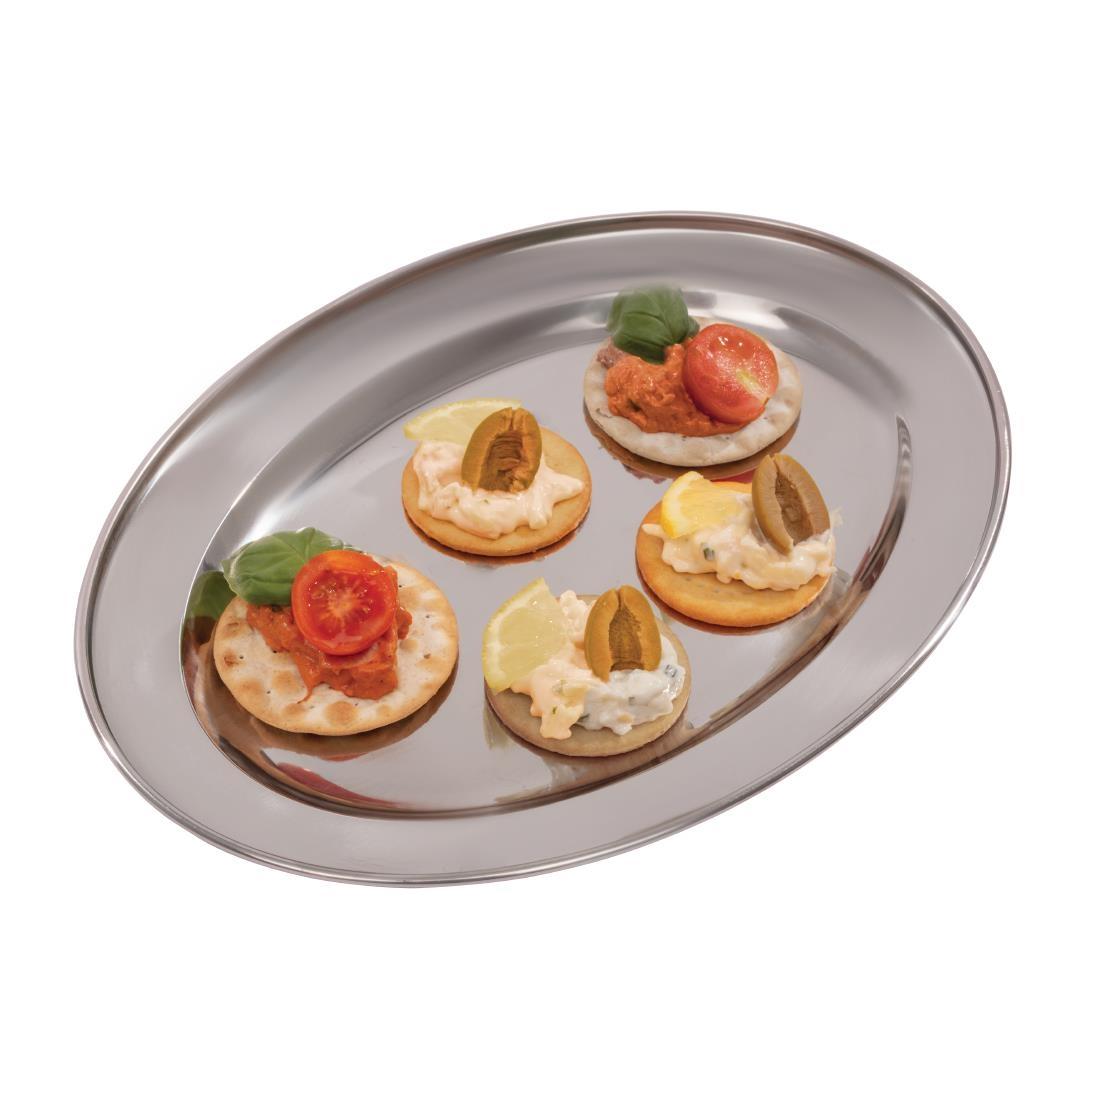 Olympia Stainless Steel Oval Serving Tray 300mm - K363  - 4